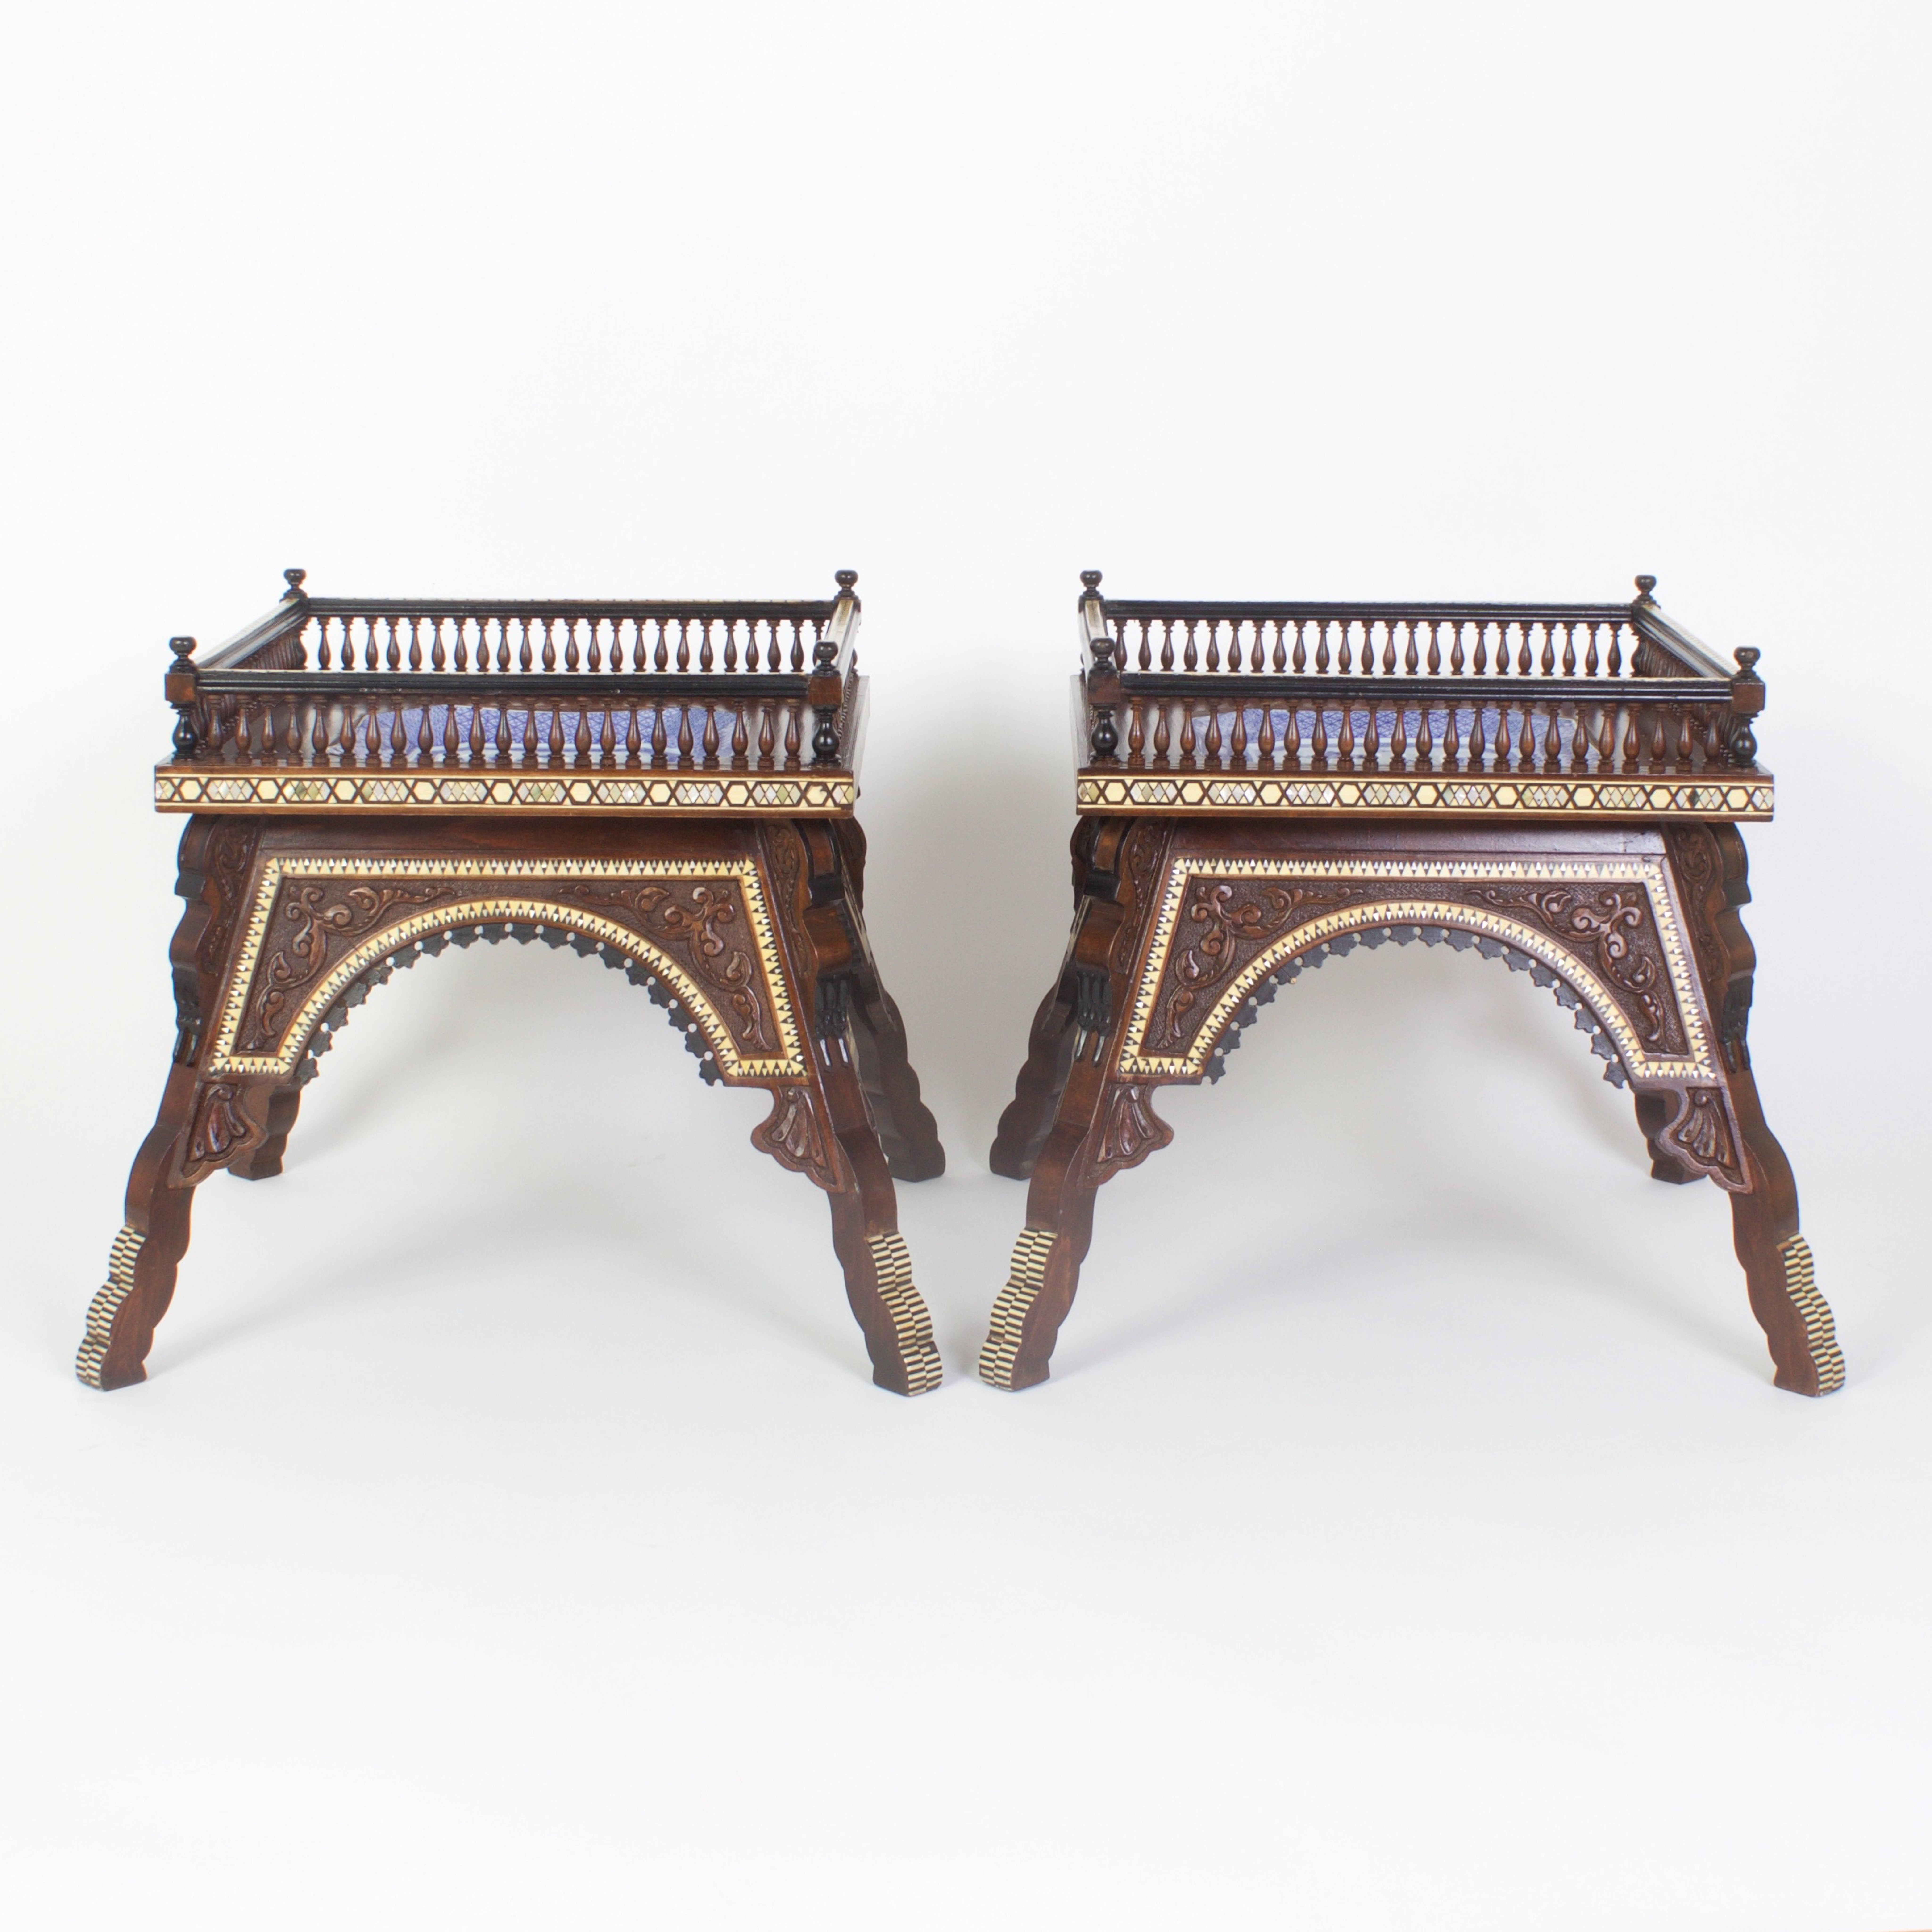 Here is a rare and important pair of tables or end tables with an unusual combination of materials and influences. The tops have galleries with railings and turned balustrades. The middle of the tops have 19th century Chinese Export blue and white